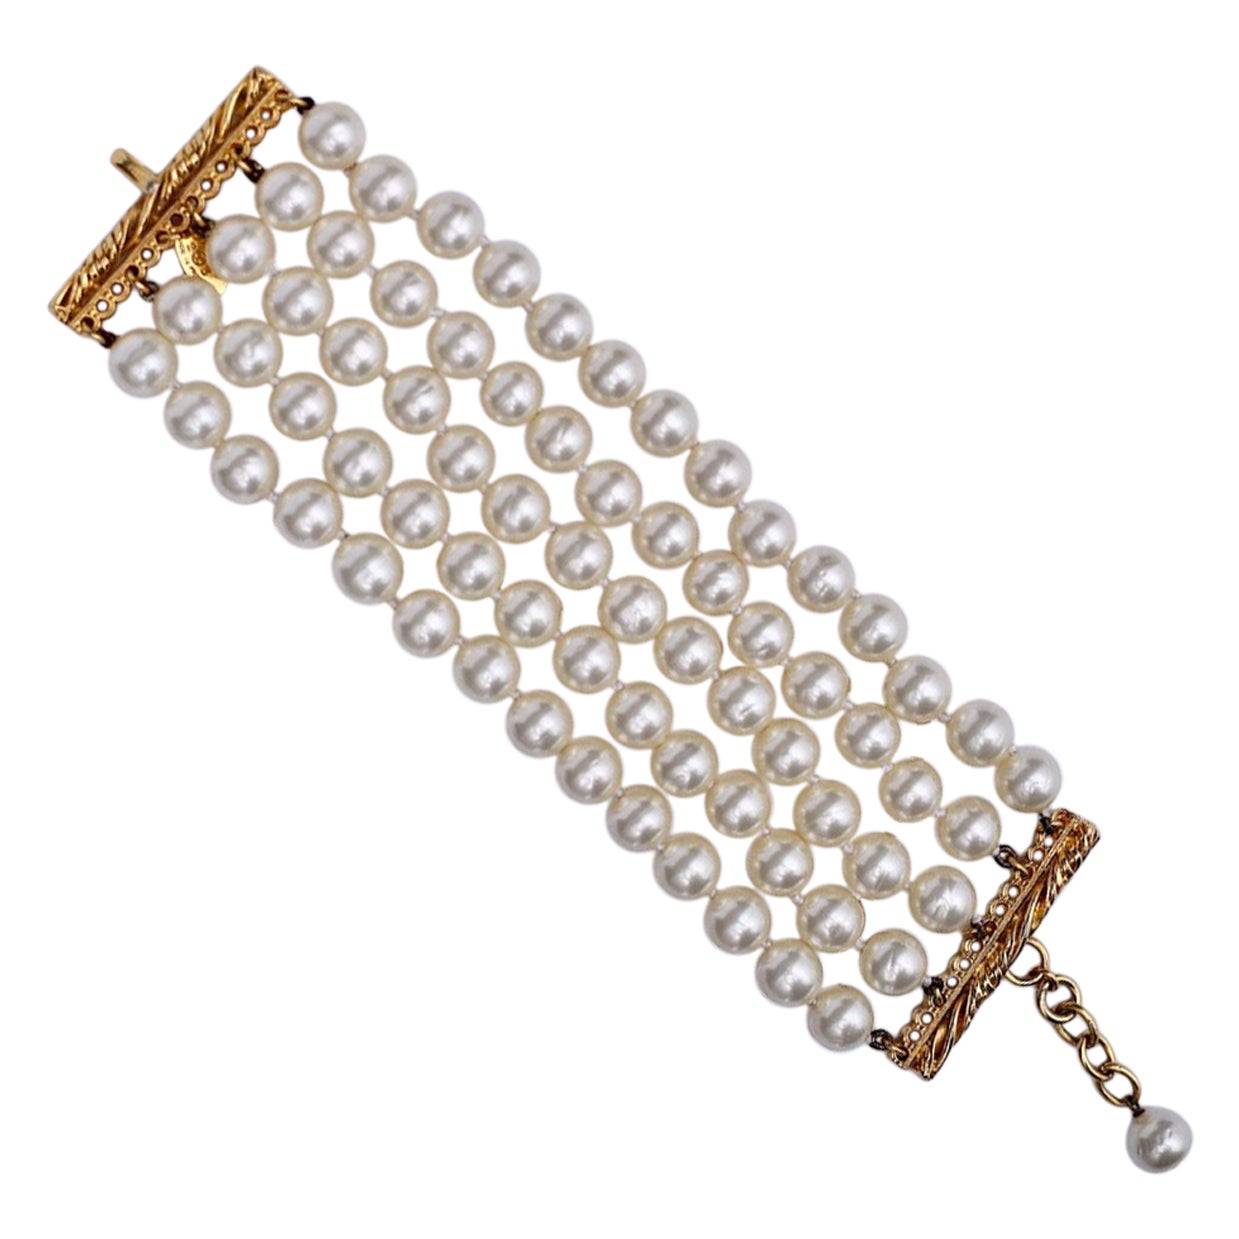 Chanel Pearly Beads Bracelet 